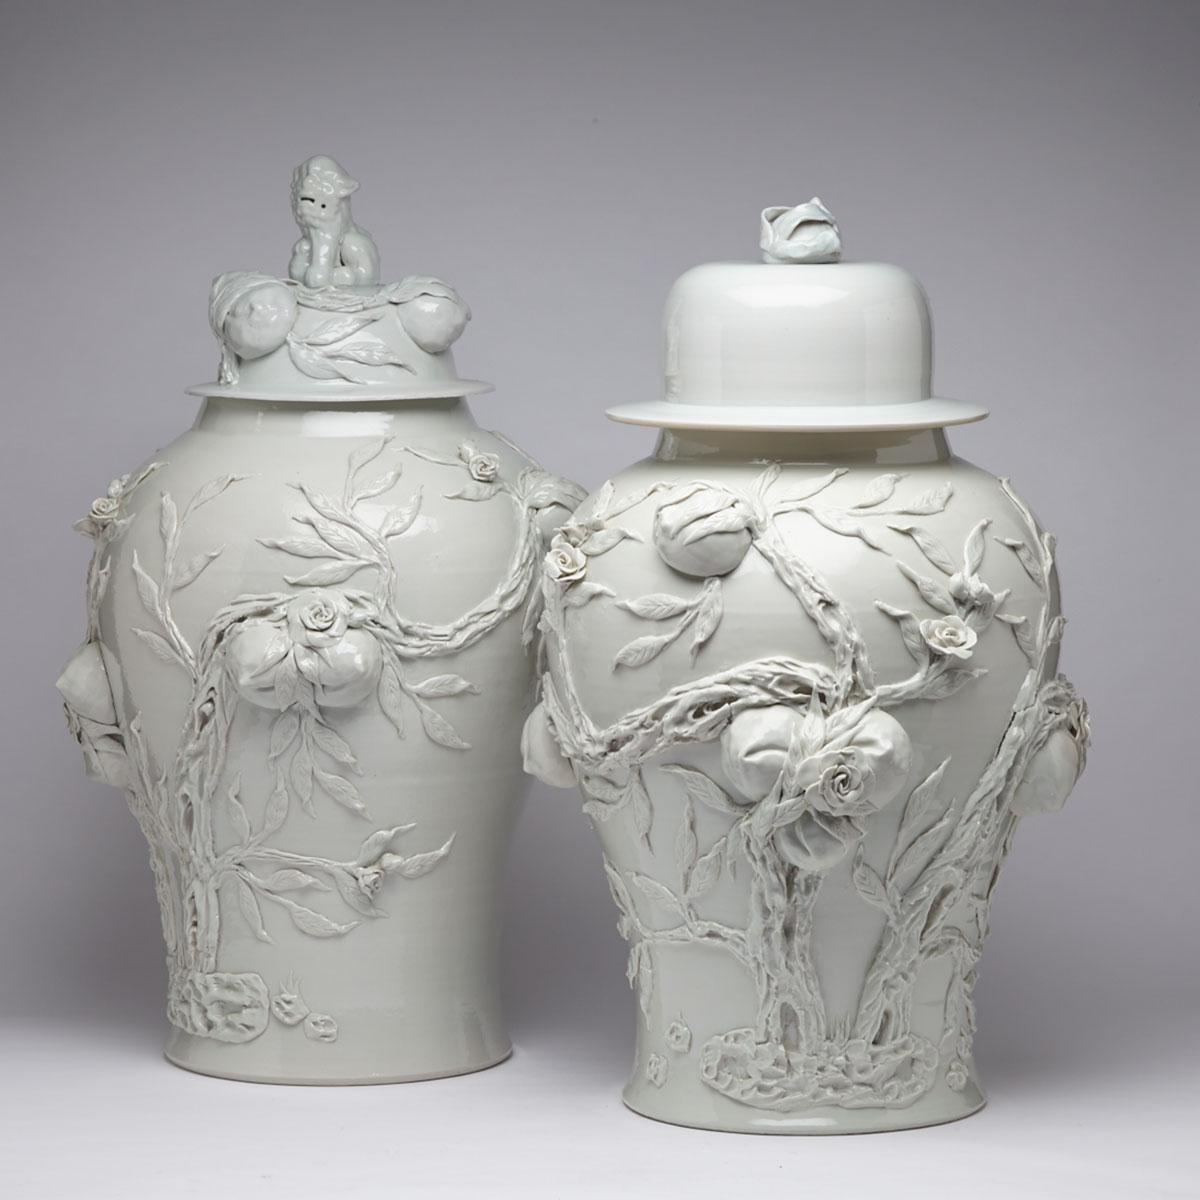 Large Near Pair of Blanc de Chine Covered Vases, mid 20th century